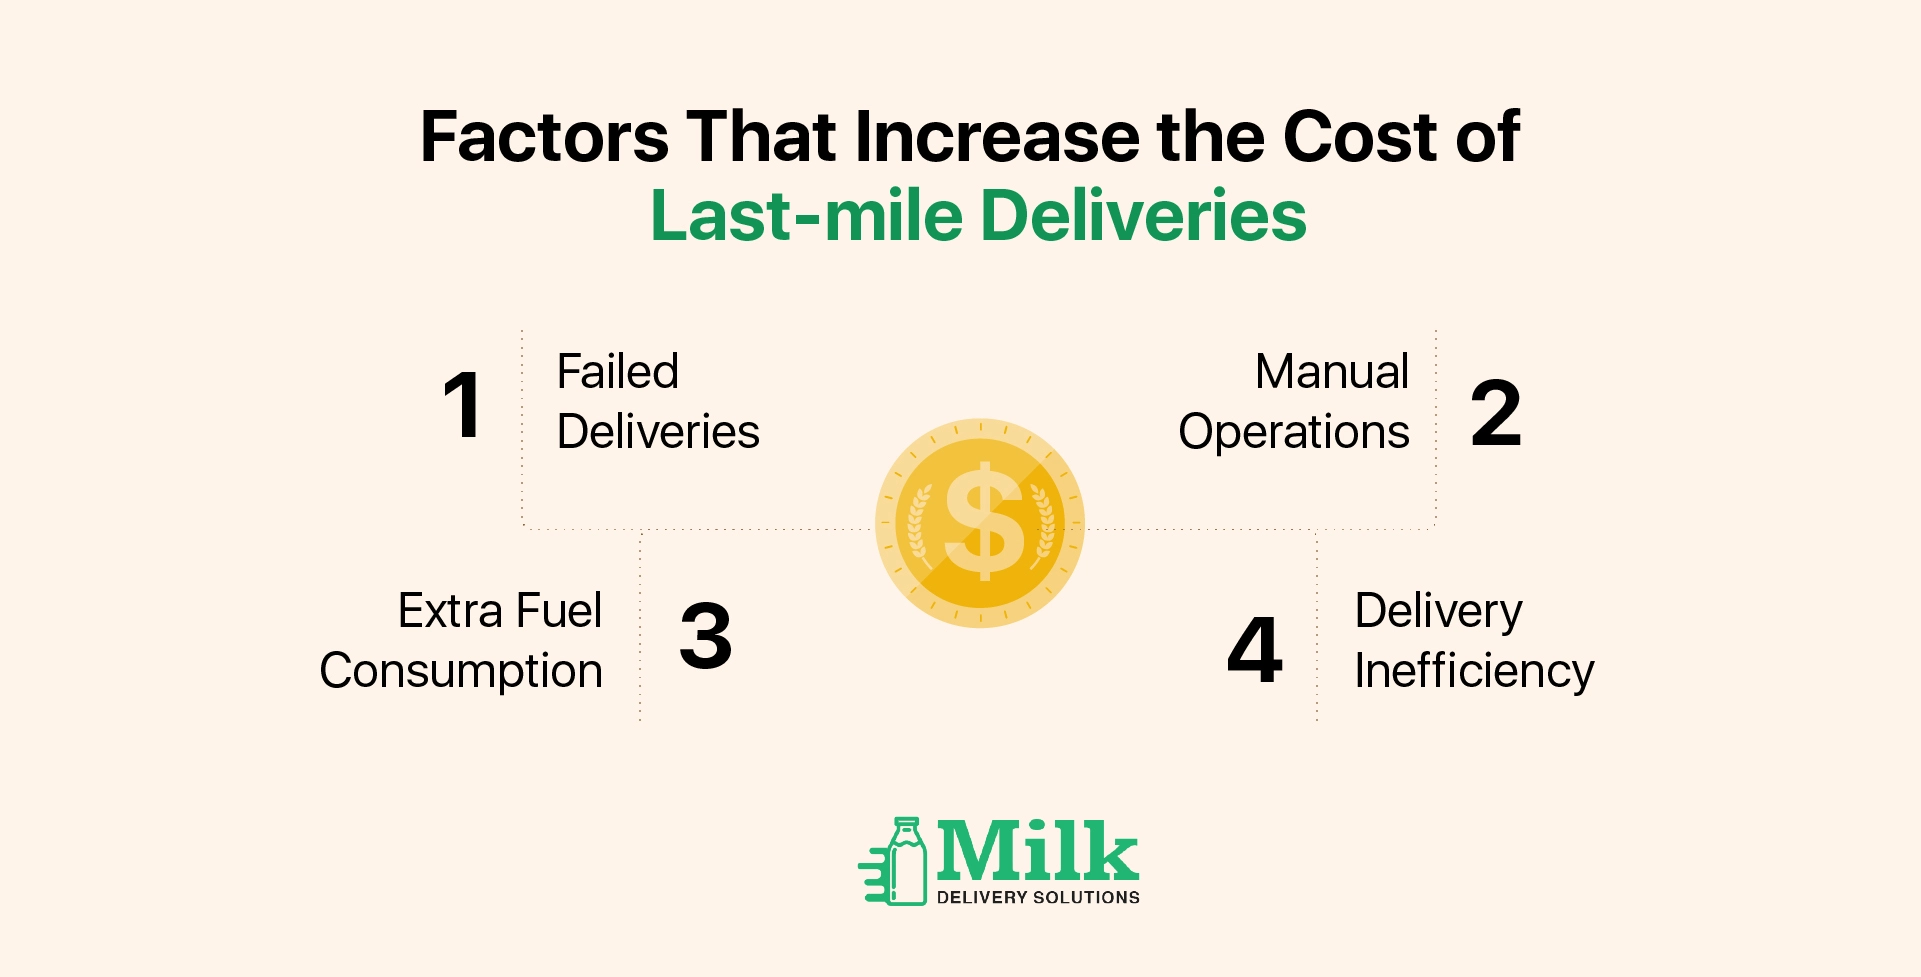 ravi garg, mds, factors, last-mile deliveries, failed deliveries, manual operations, fuel costs, delivery inefficiency